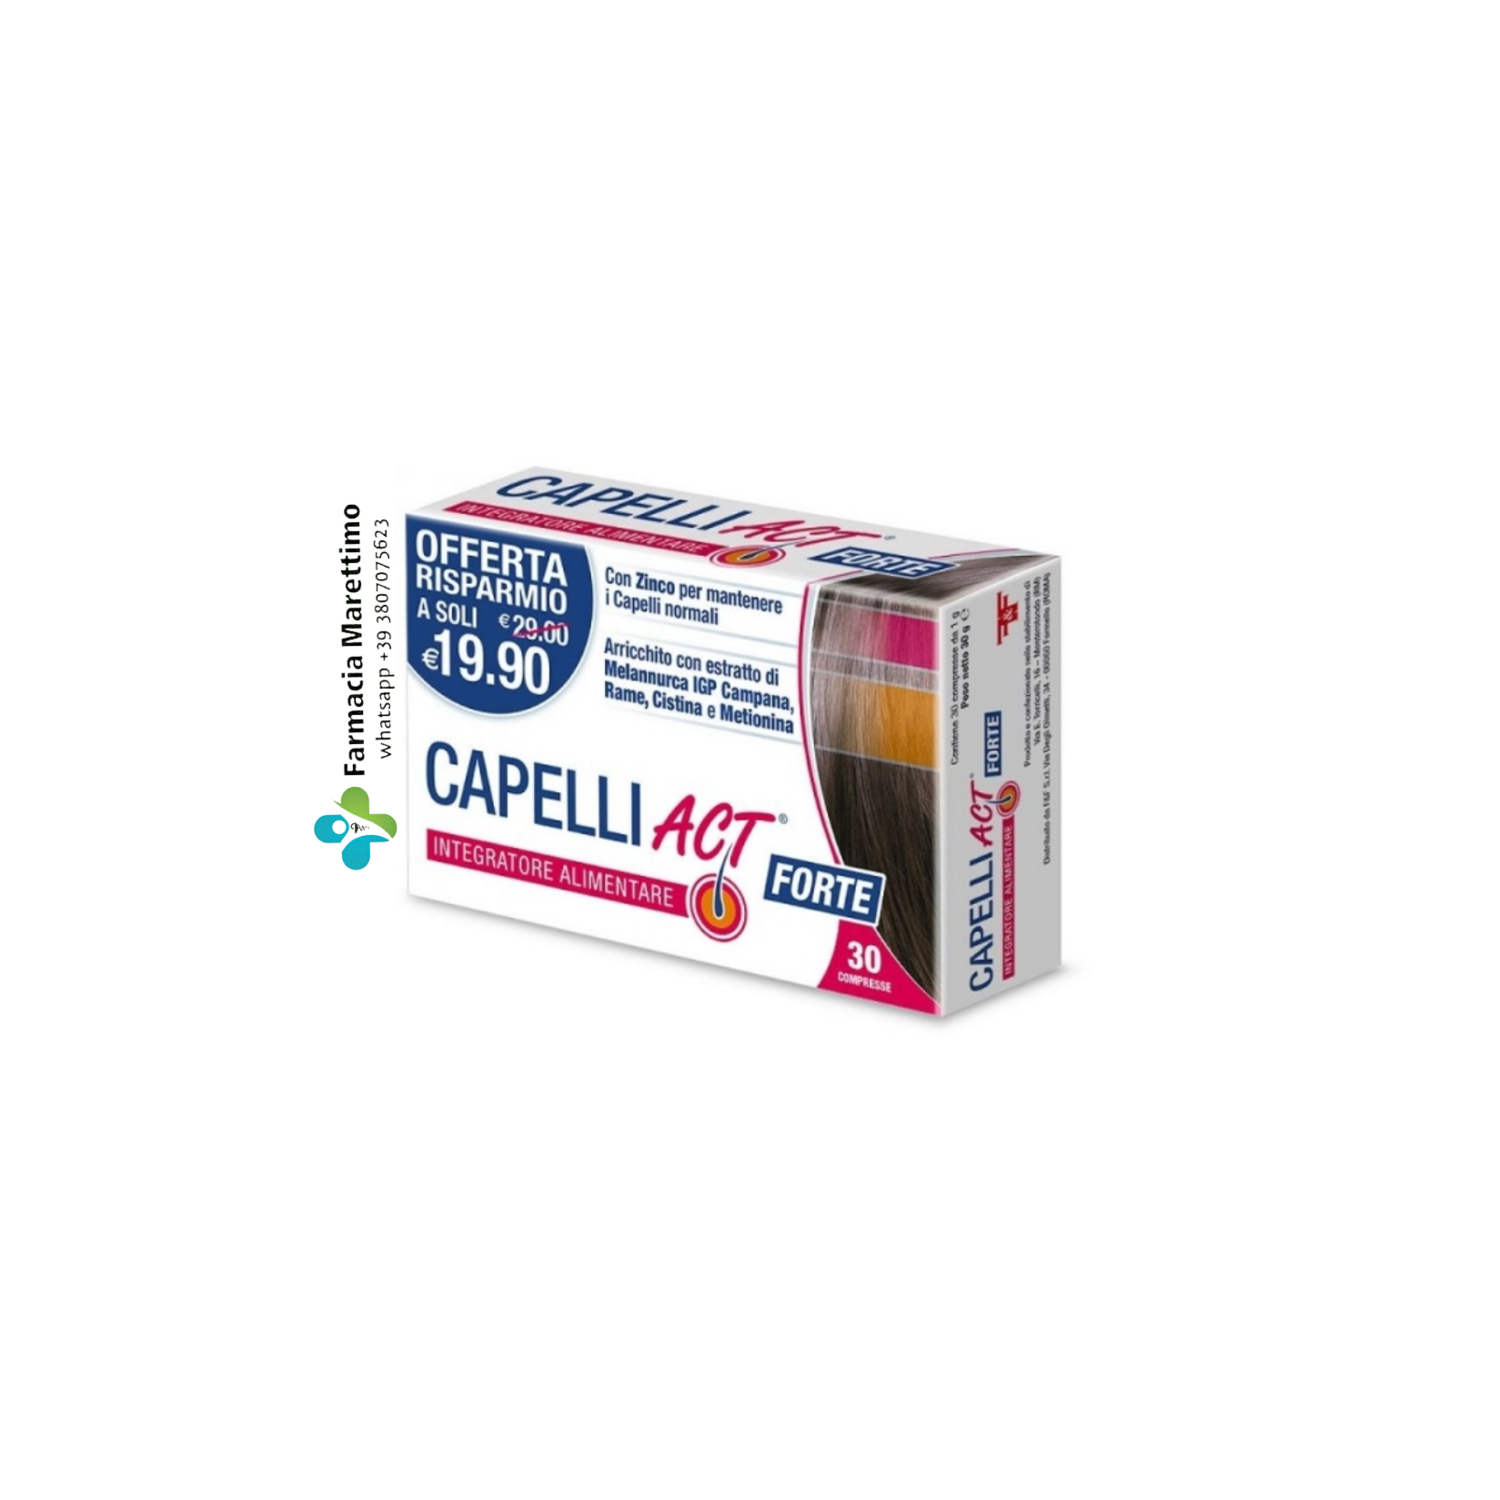 Capelli Act Forte 30cpr